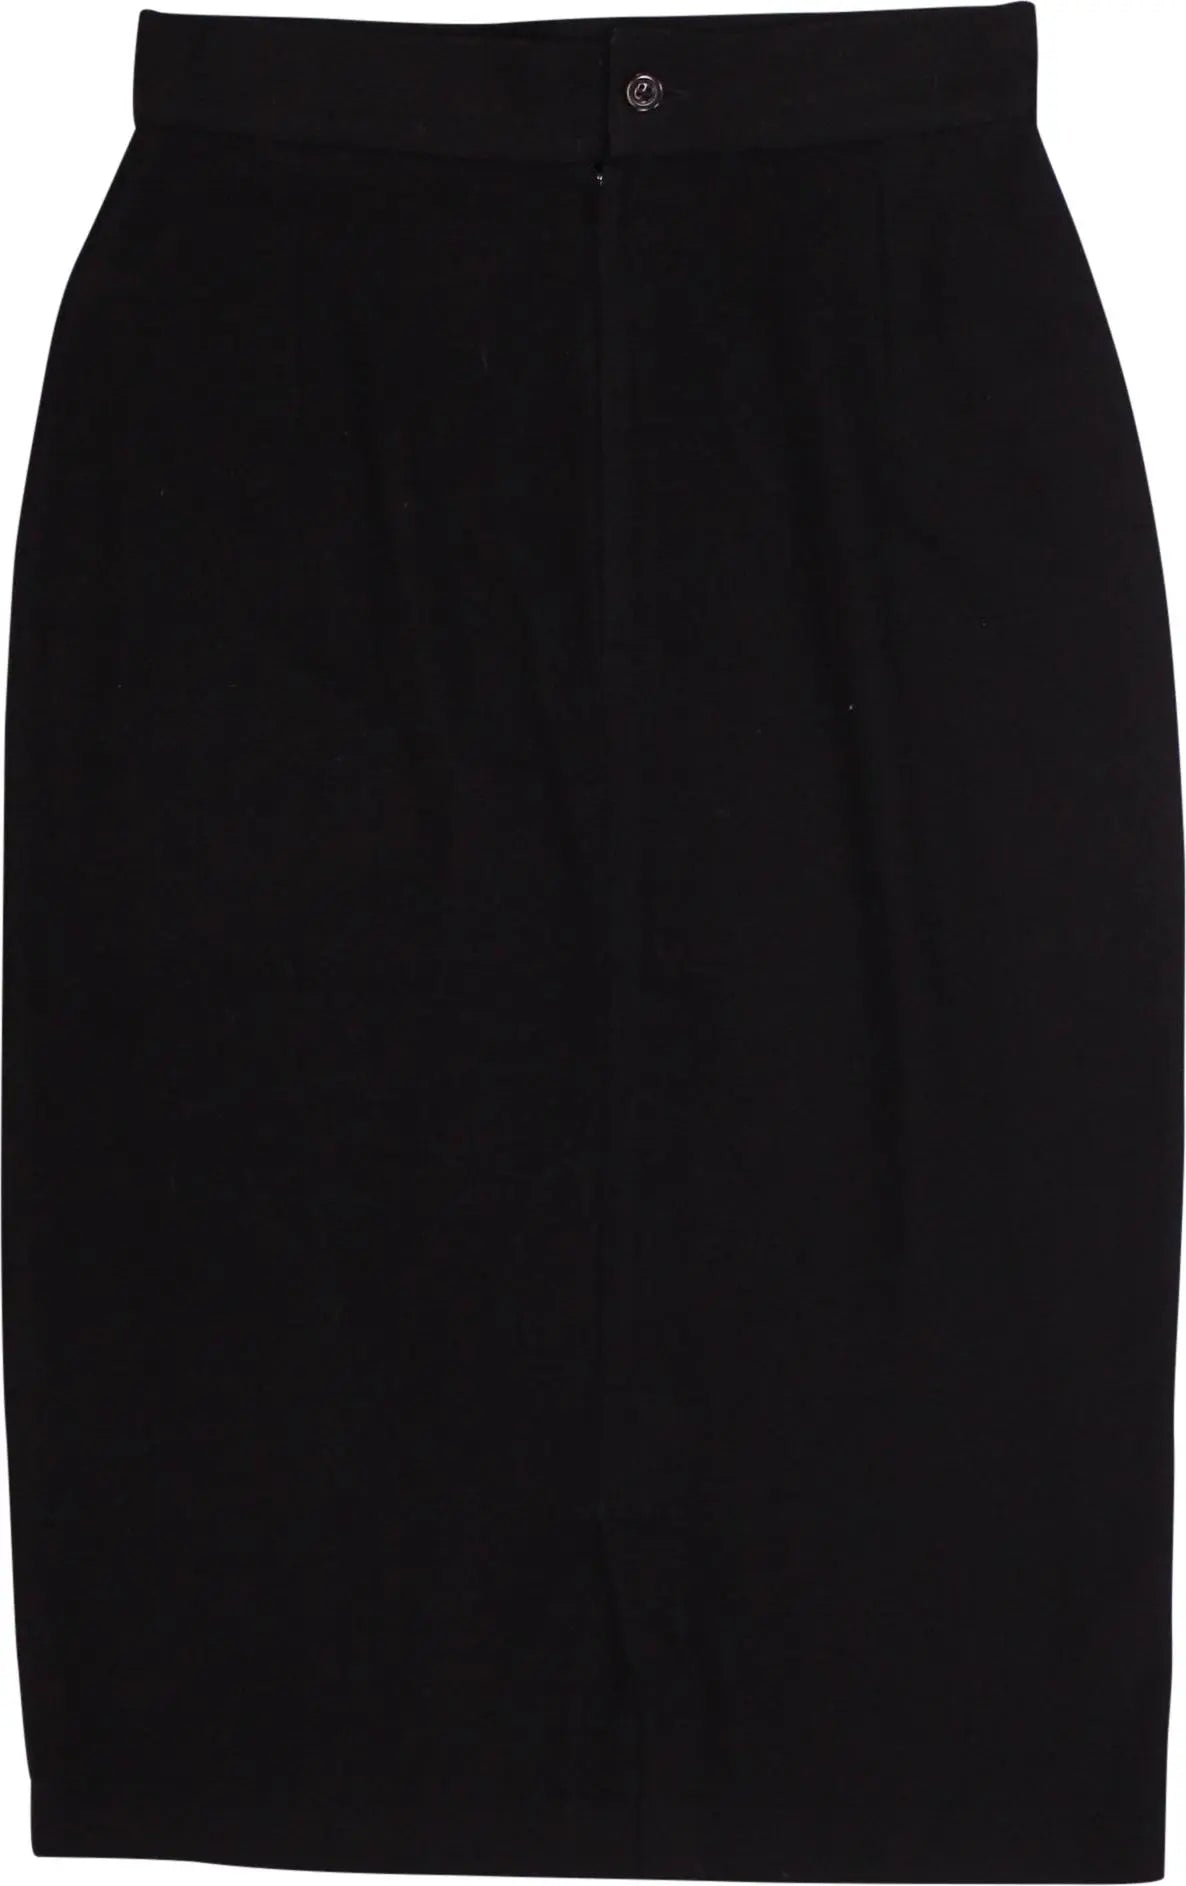 Gianni Versace - 80s Black Pencil Skirt by Gianni Versace- ThriftTale.com - Vintage and second handclothing